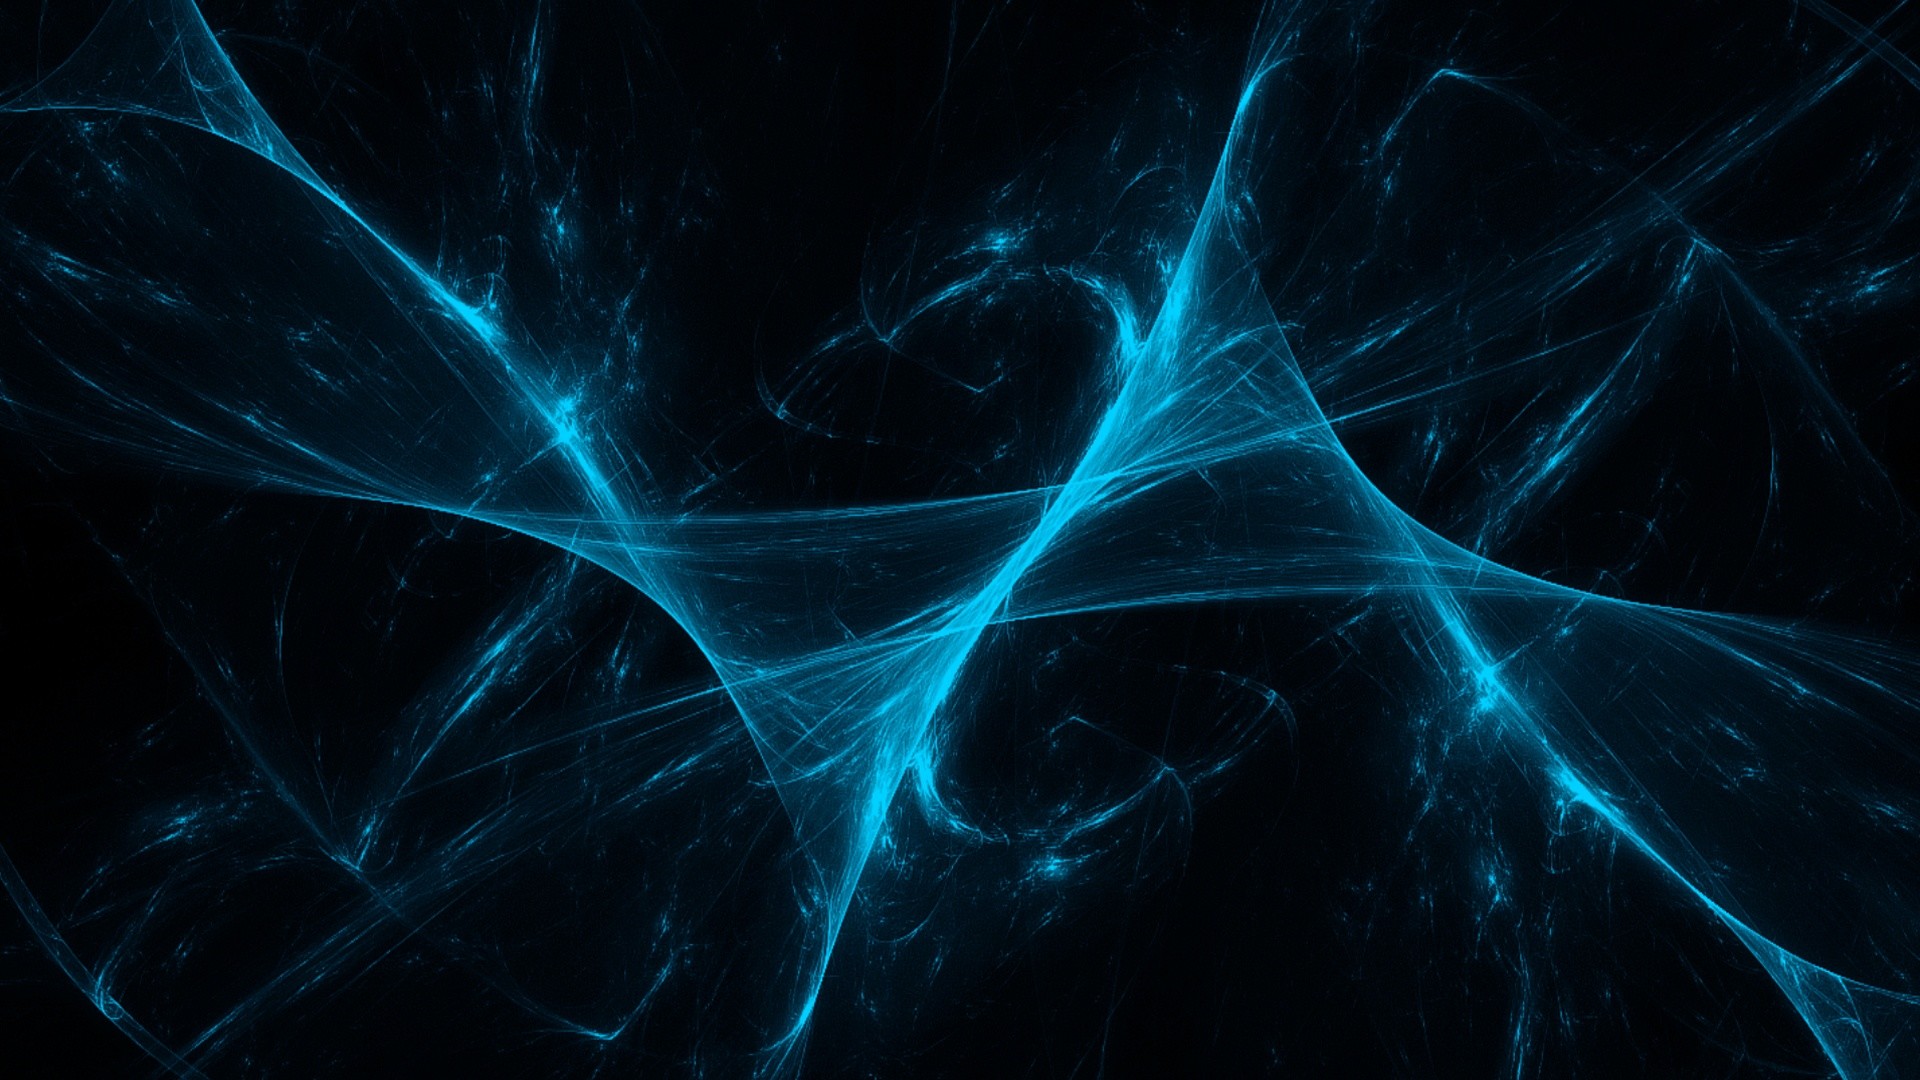 1920x1080 hd wallpaper ws abstract is an HD wallpaper posted in Abstract category.  You can edit